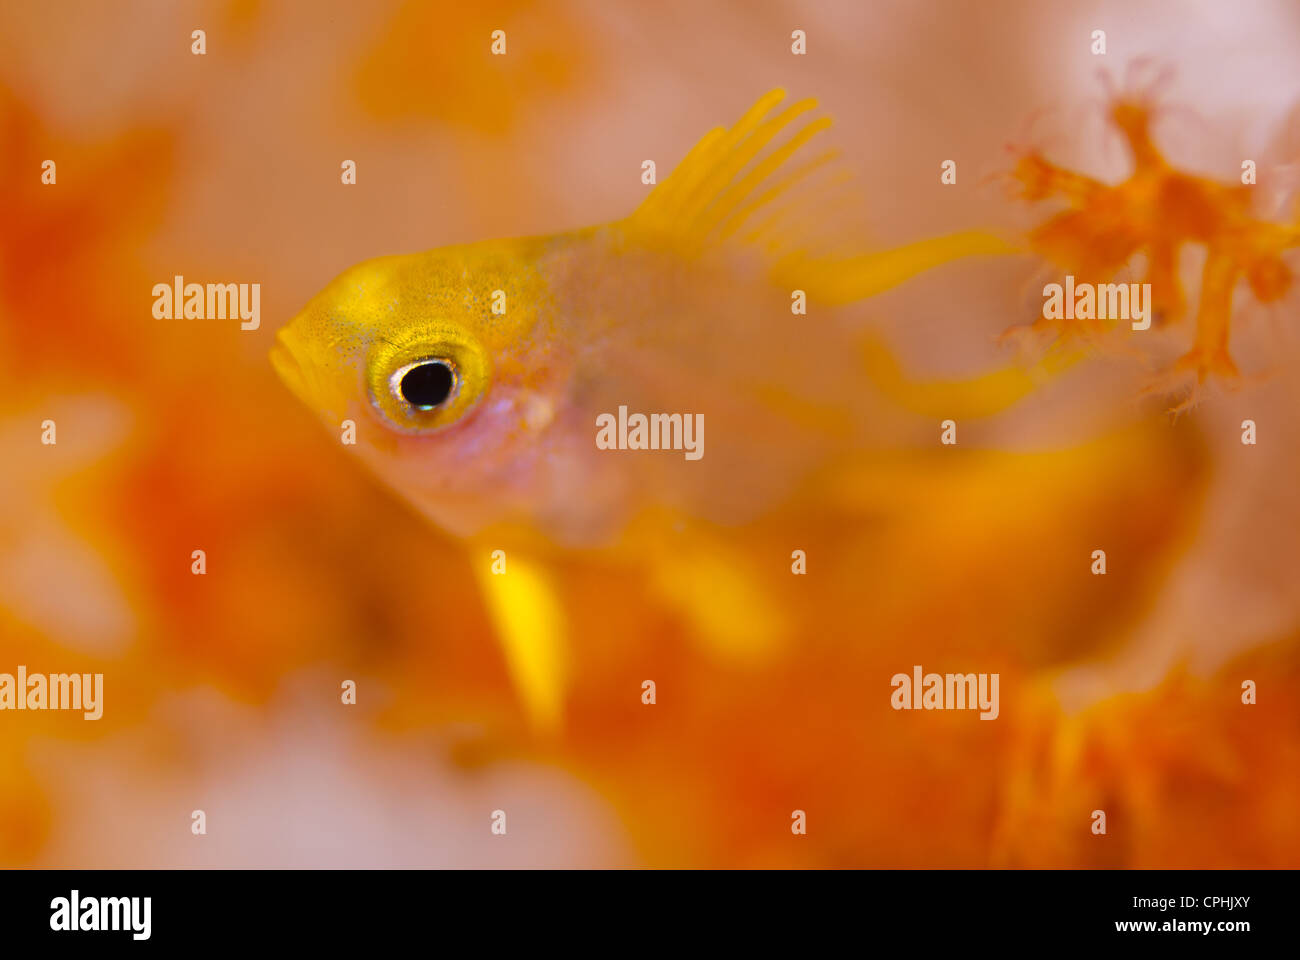 A very tiny yellow damsel fish in front of a red orange soft coral , shot wide ope to blur most of the image Stock Photo